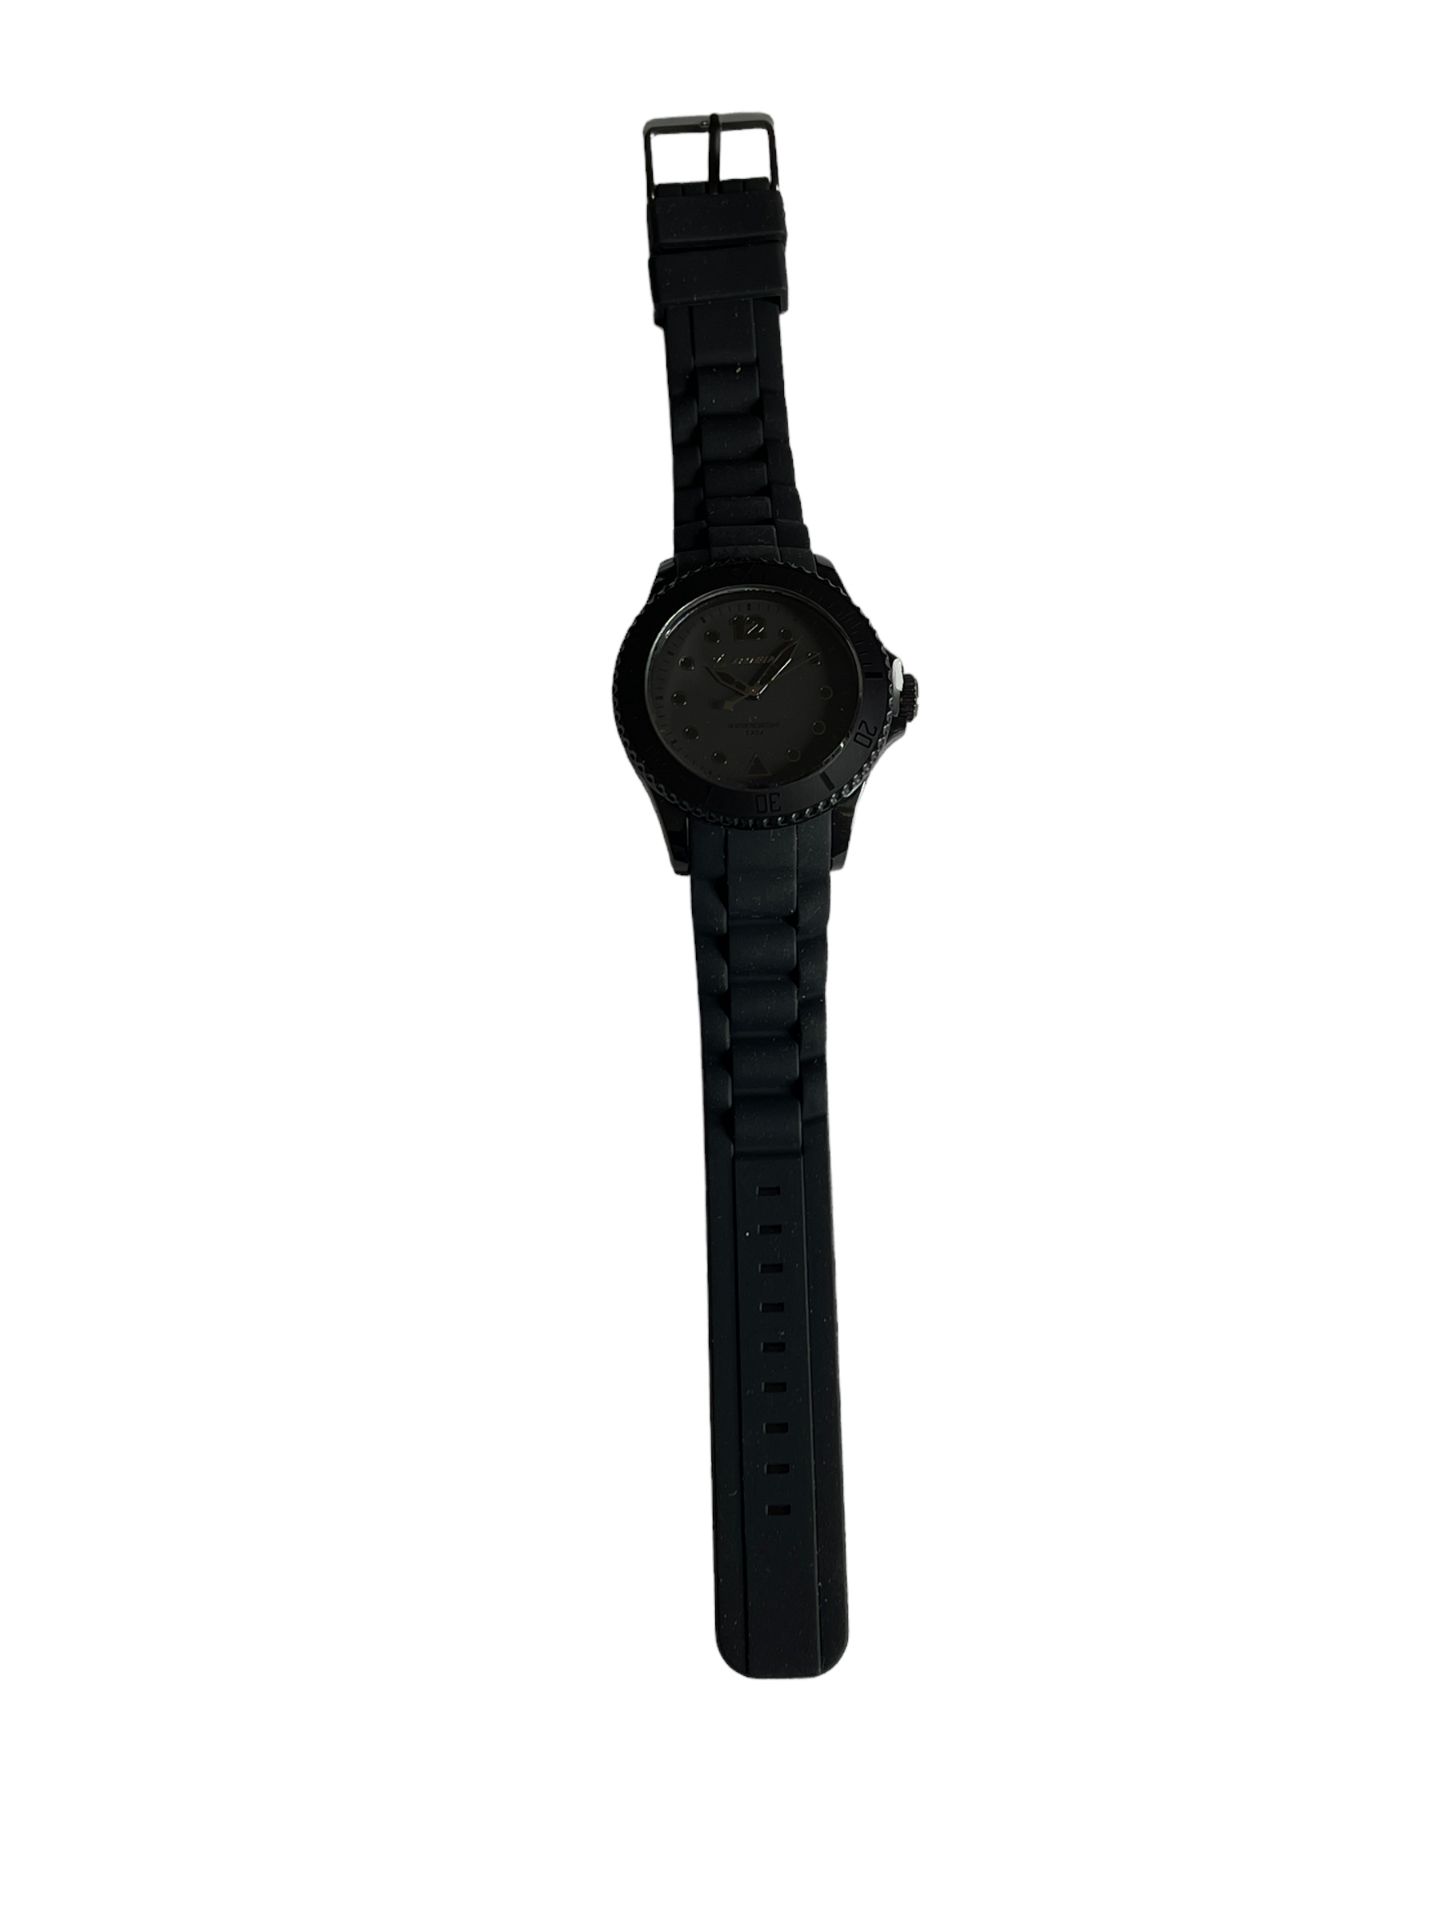 BOEING STAFF ISSUE UNISEX WATCH NEW NEVER BEEN USED - Image 3 of 7